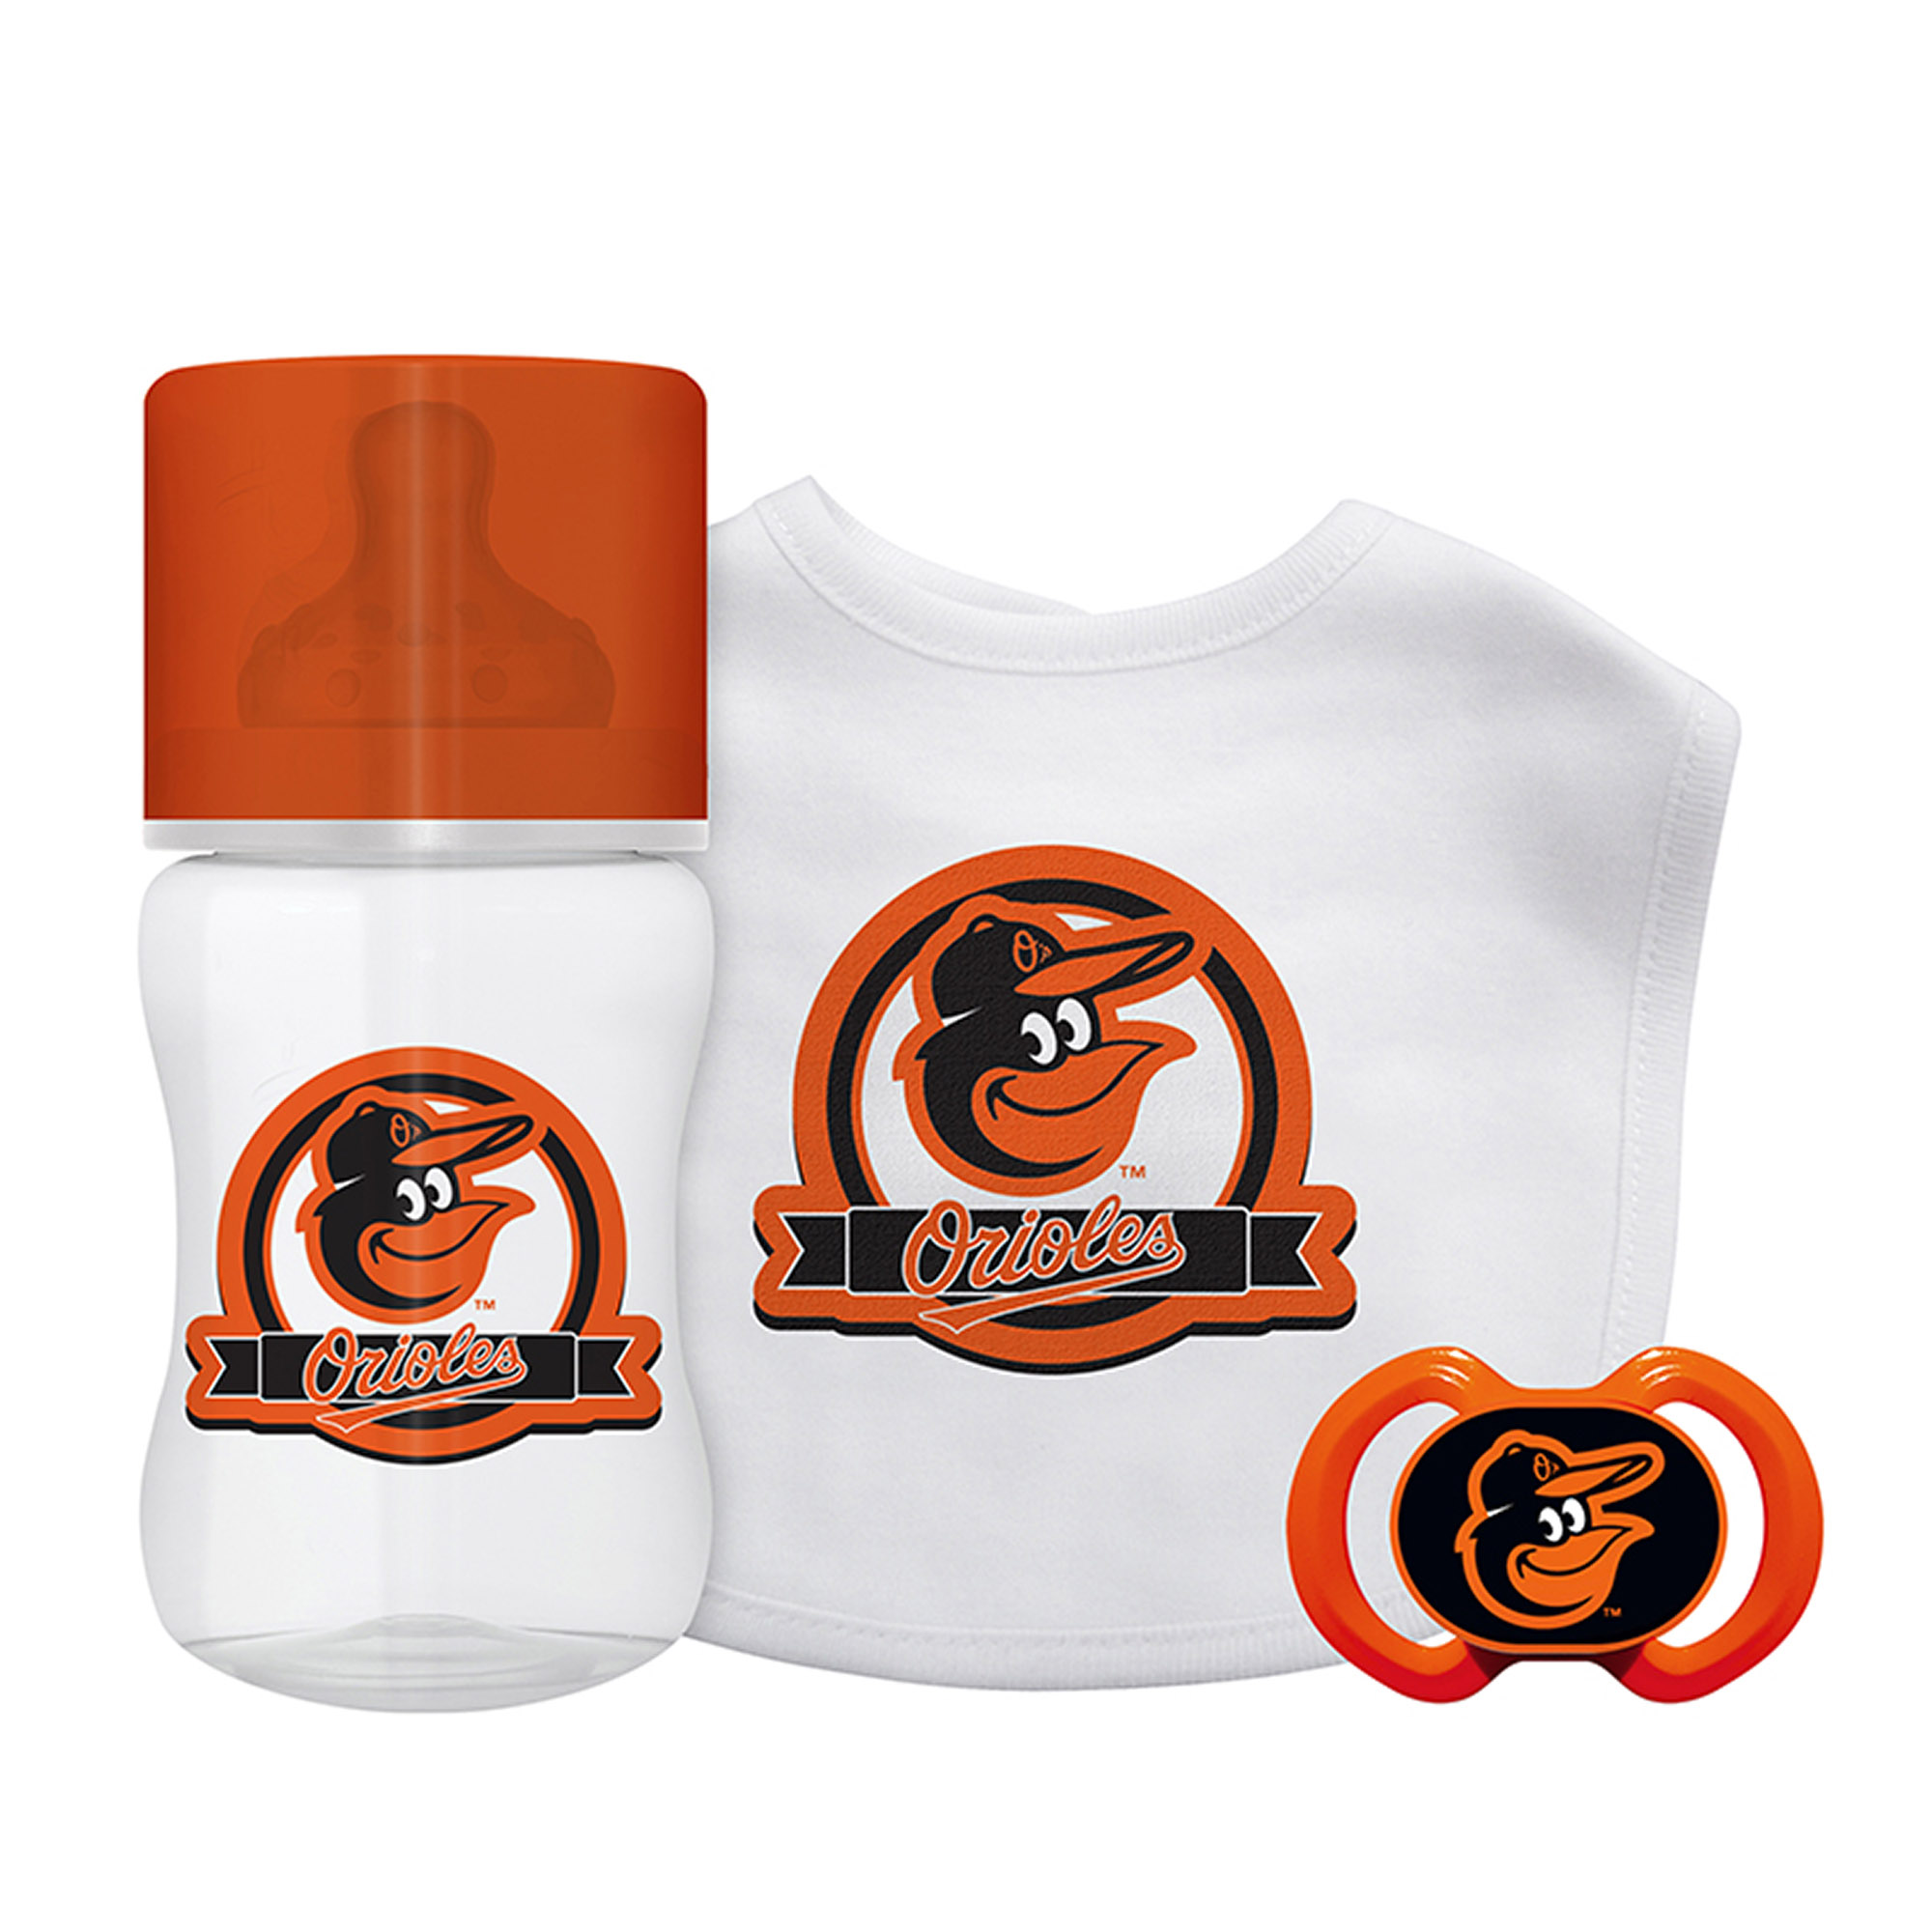 BabyFanatic Officially Licensed 3 Piece Unisex Gift Set - MLB Baltimore Orioles - image 1 of 4